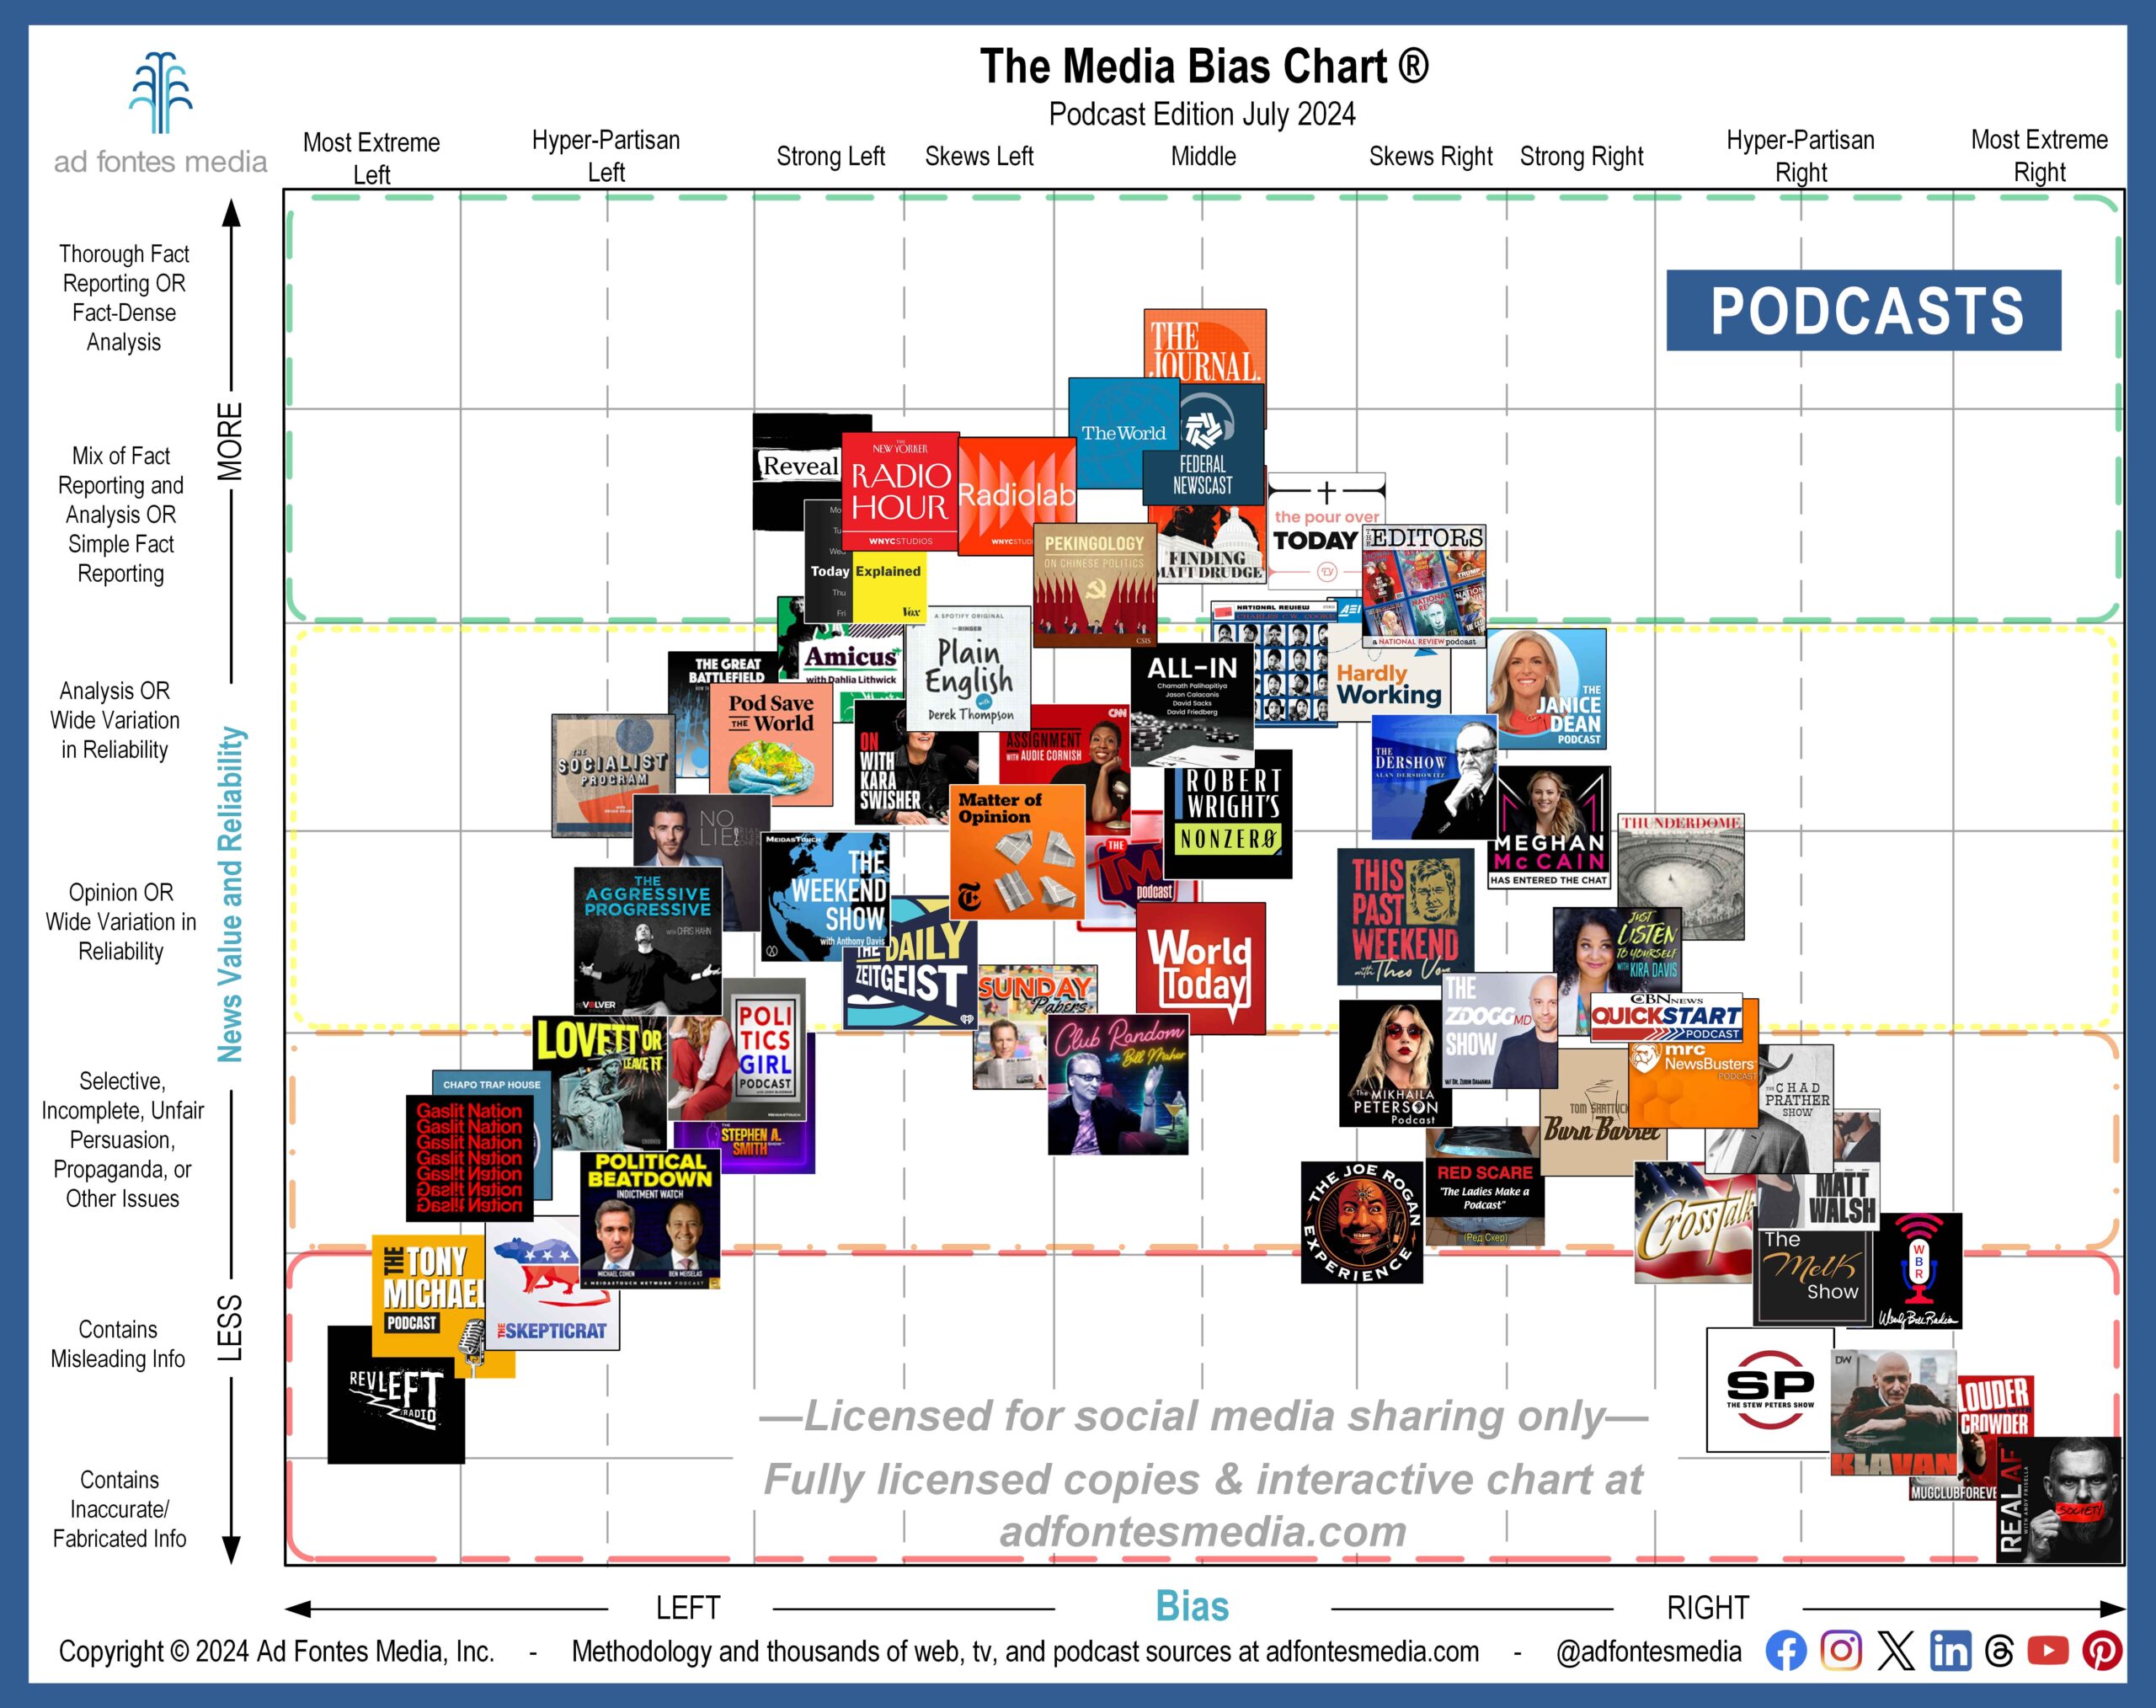 Ad Fontes Media features 62 podcasts on the July Media Bias Chart, 8 of them for the first time